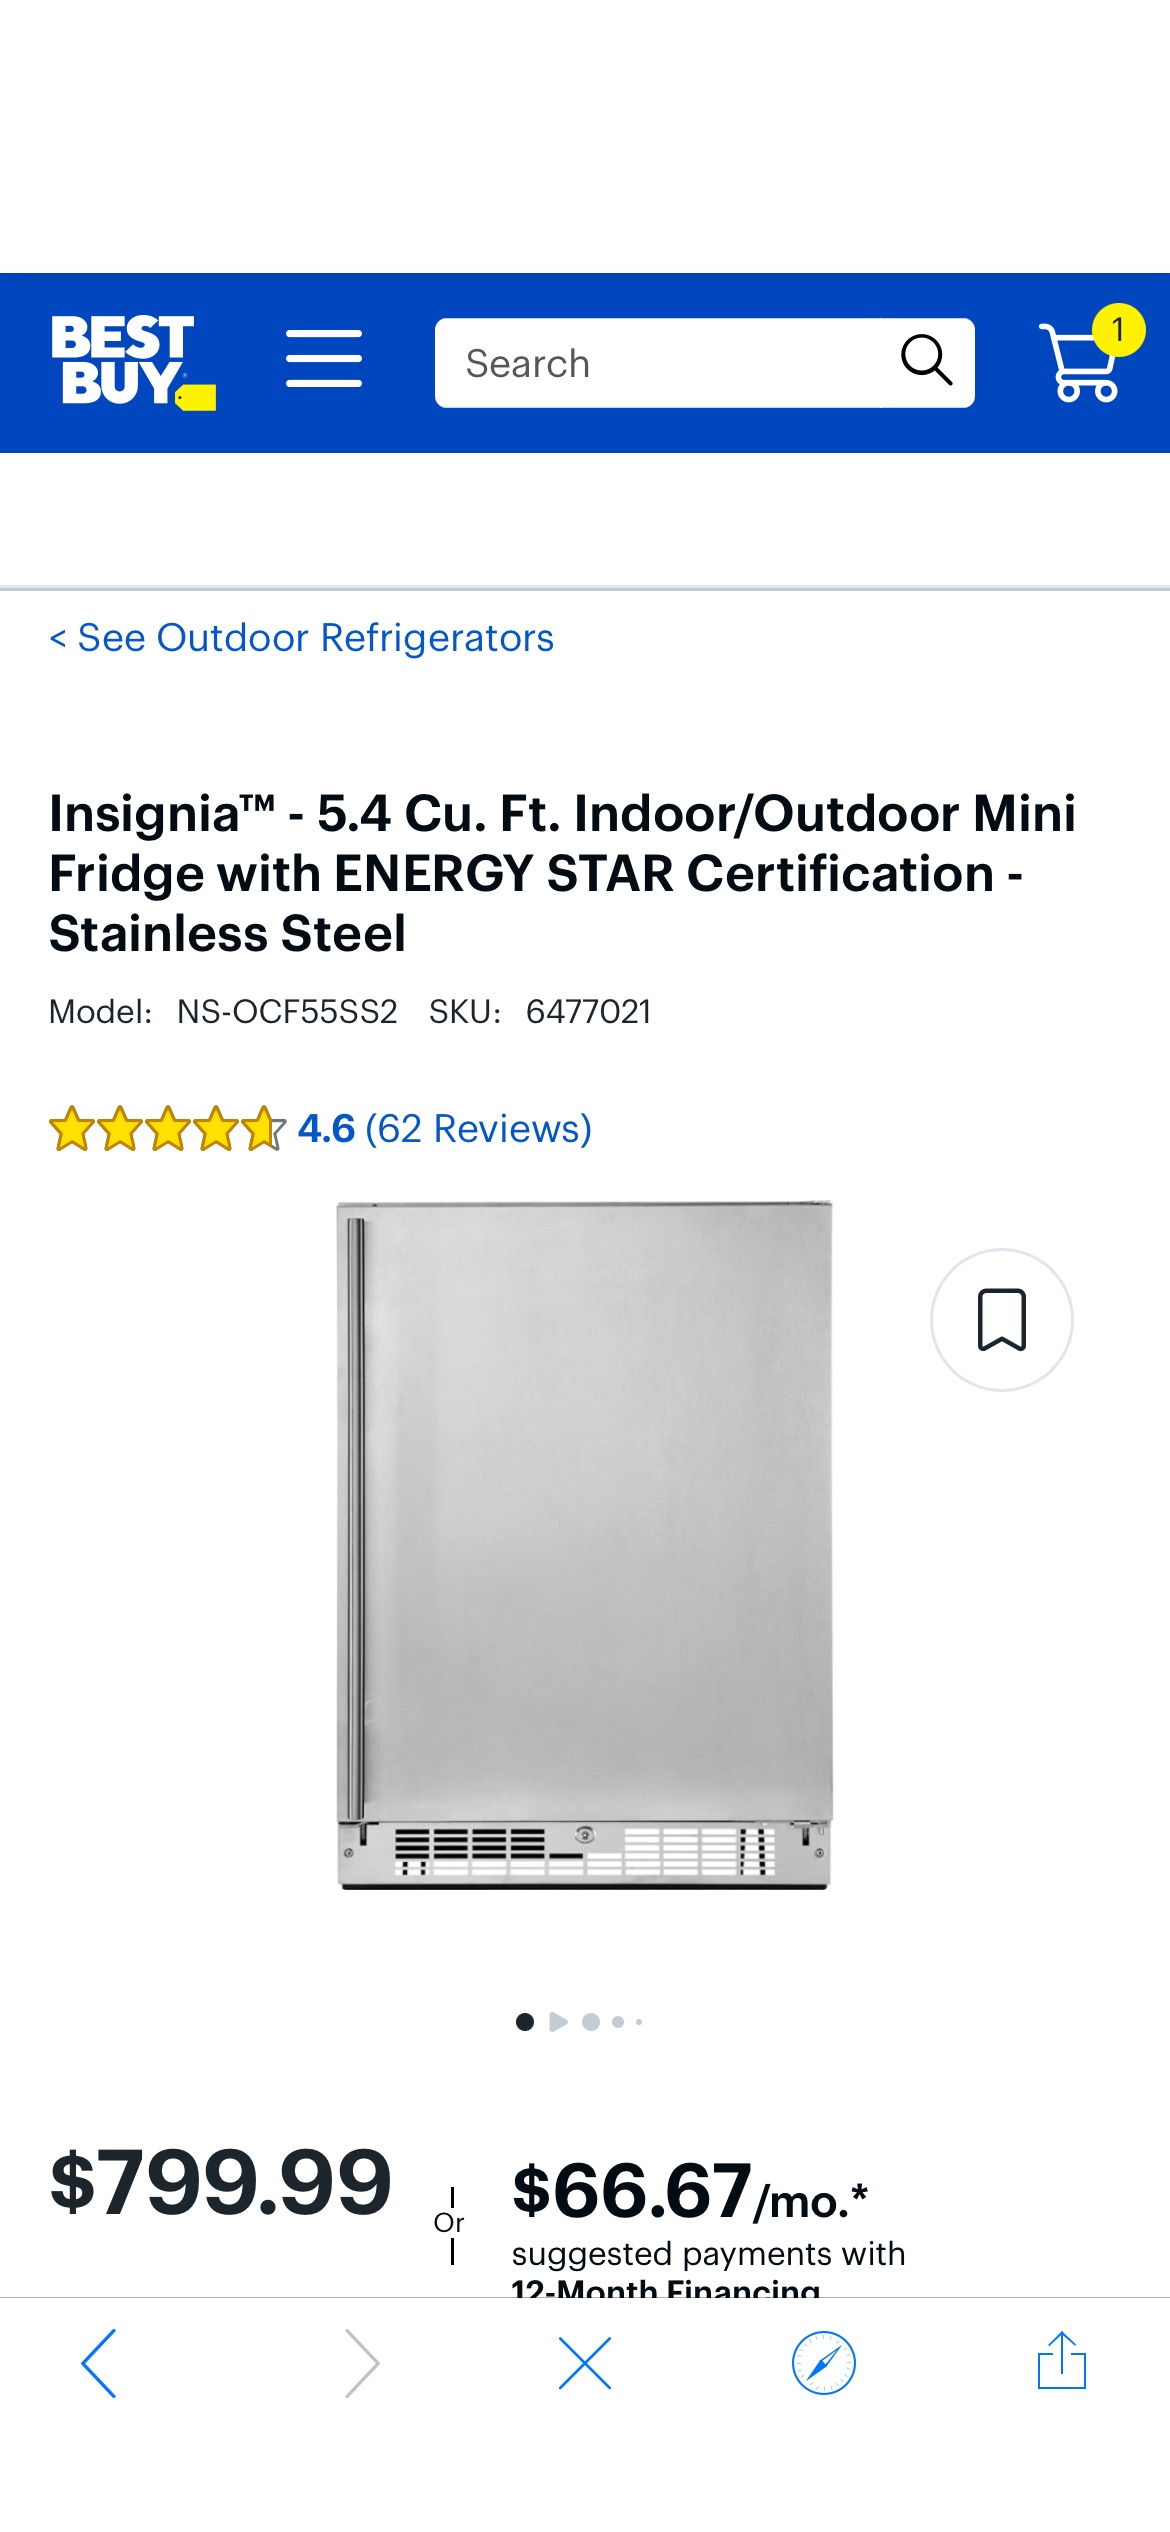 Insignia™ 5.4 Cu. Ft. Indoor/Outdoor Mini Fridge with ENERGY STAR Certification Stainless Steel NS-OCF55SS2 - Best Buy